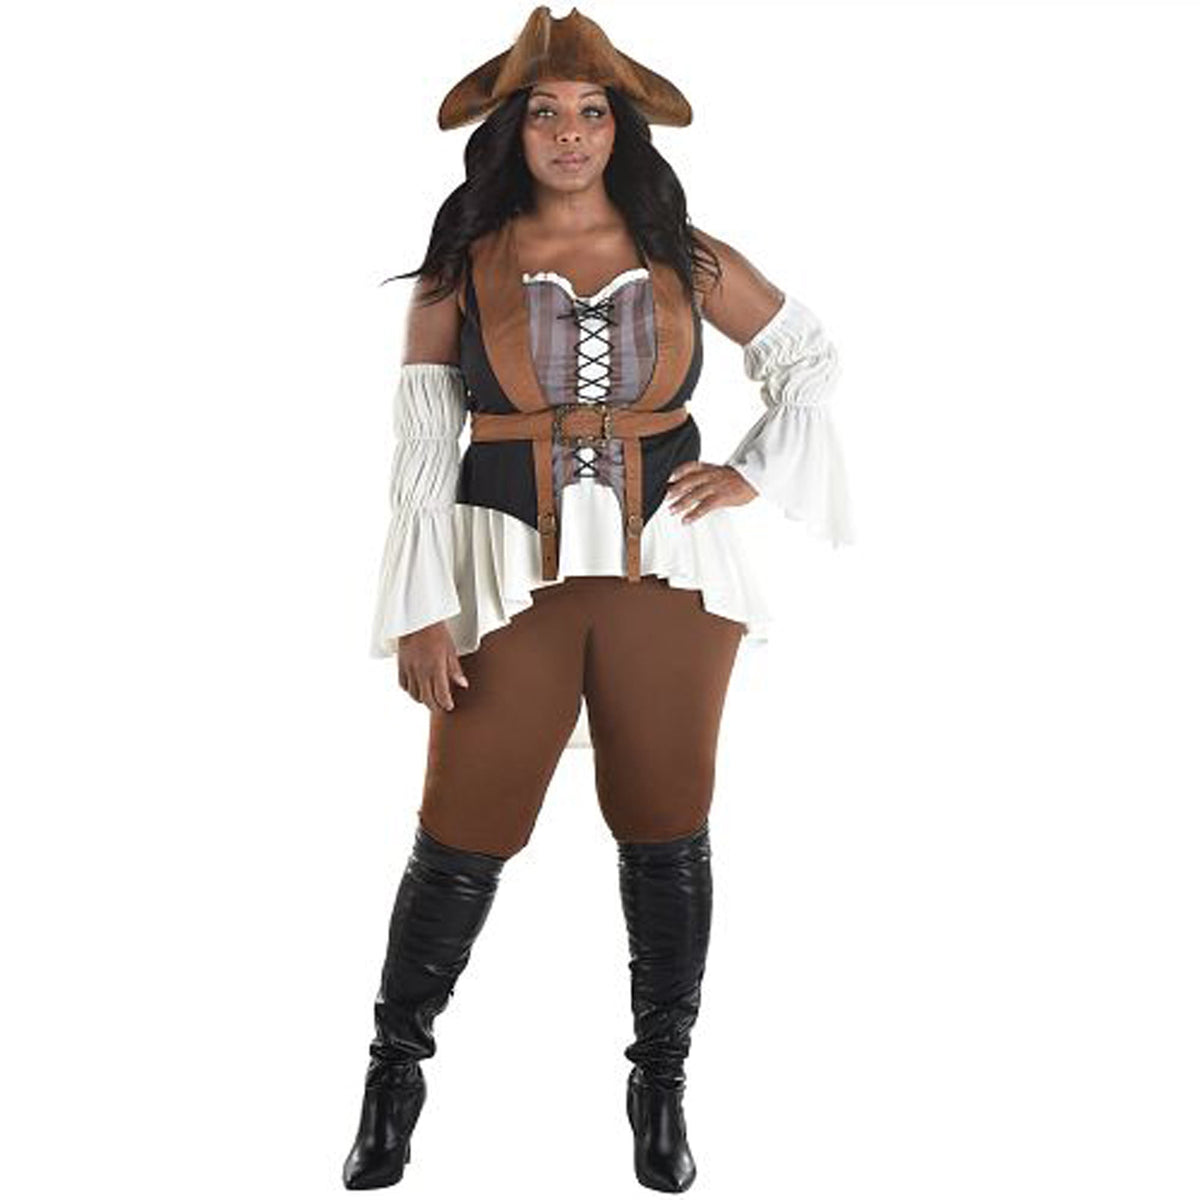 SUIT YOURSELF COSTUME CO. Costumes Shipwrecked Pirate Plus Size Costume for Adults, Brown and White Catsuit